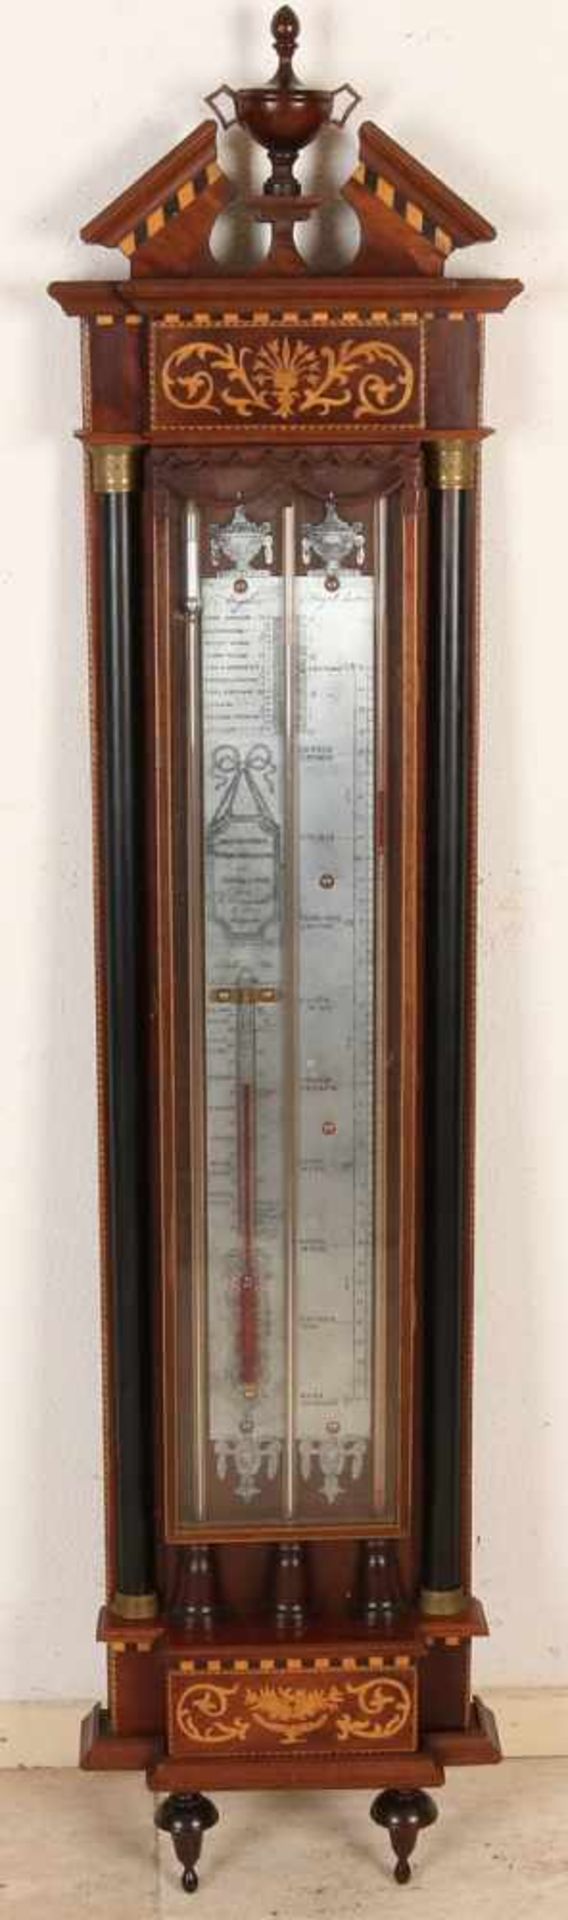 Dutch Empire executed Louis XVI style mahogany barometer with intarsia, tin plate, half-columns with